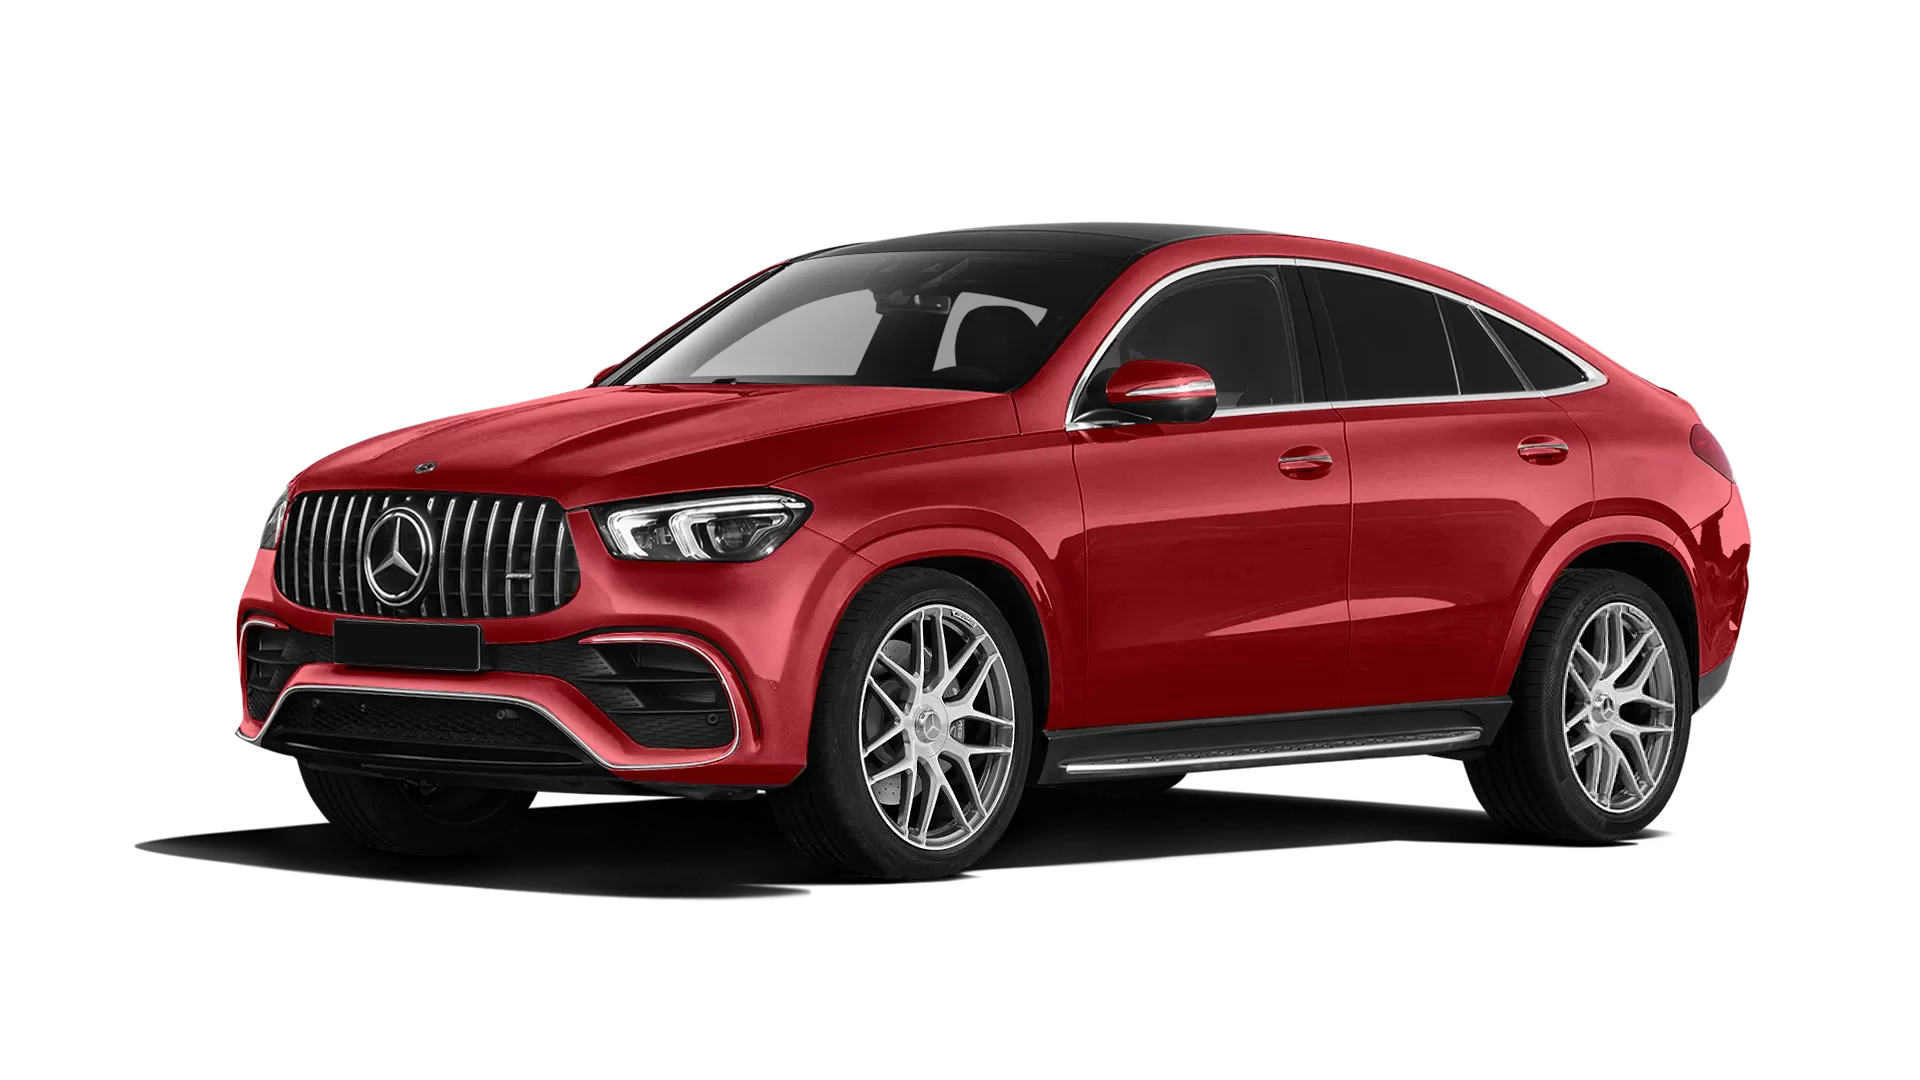 Mercedes GLE Coupe AMG 63 C167 stock front view in Hyacinthe Red color